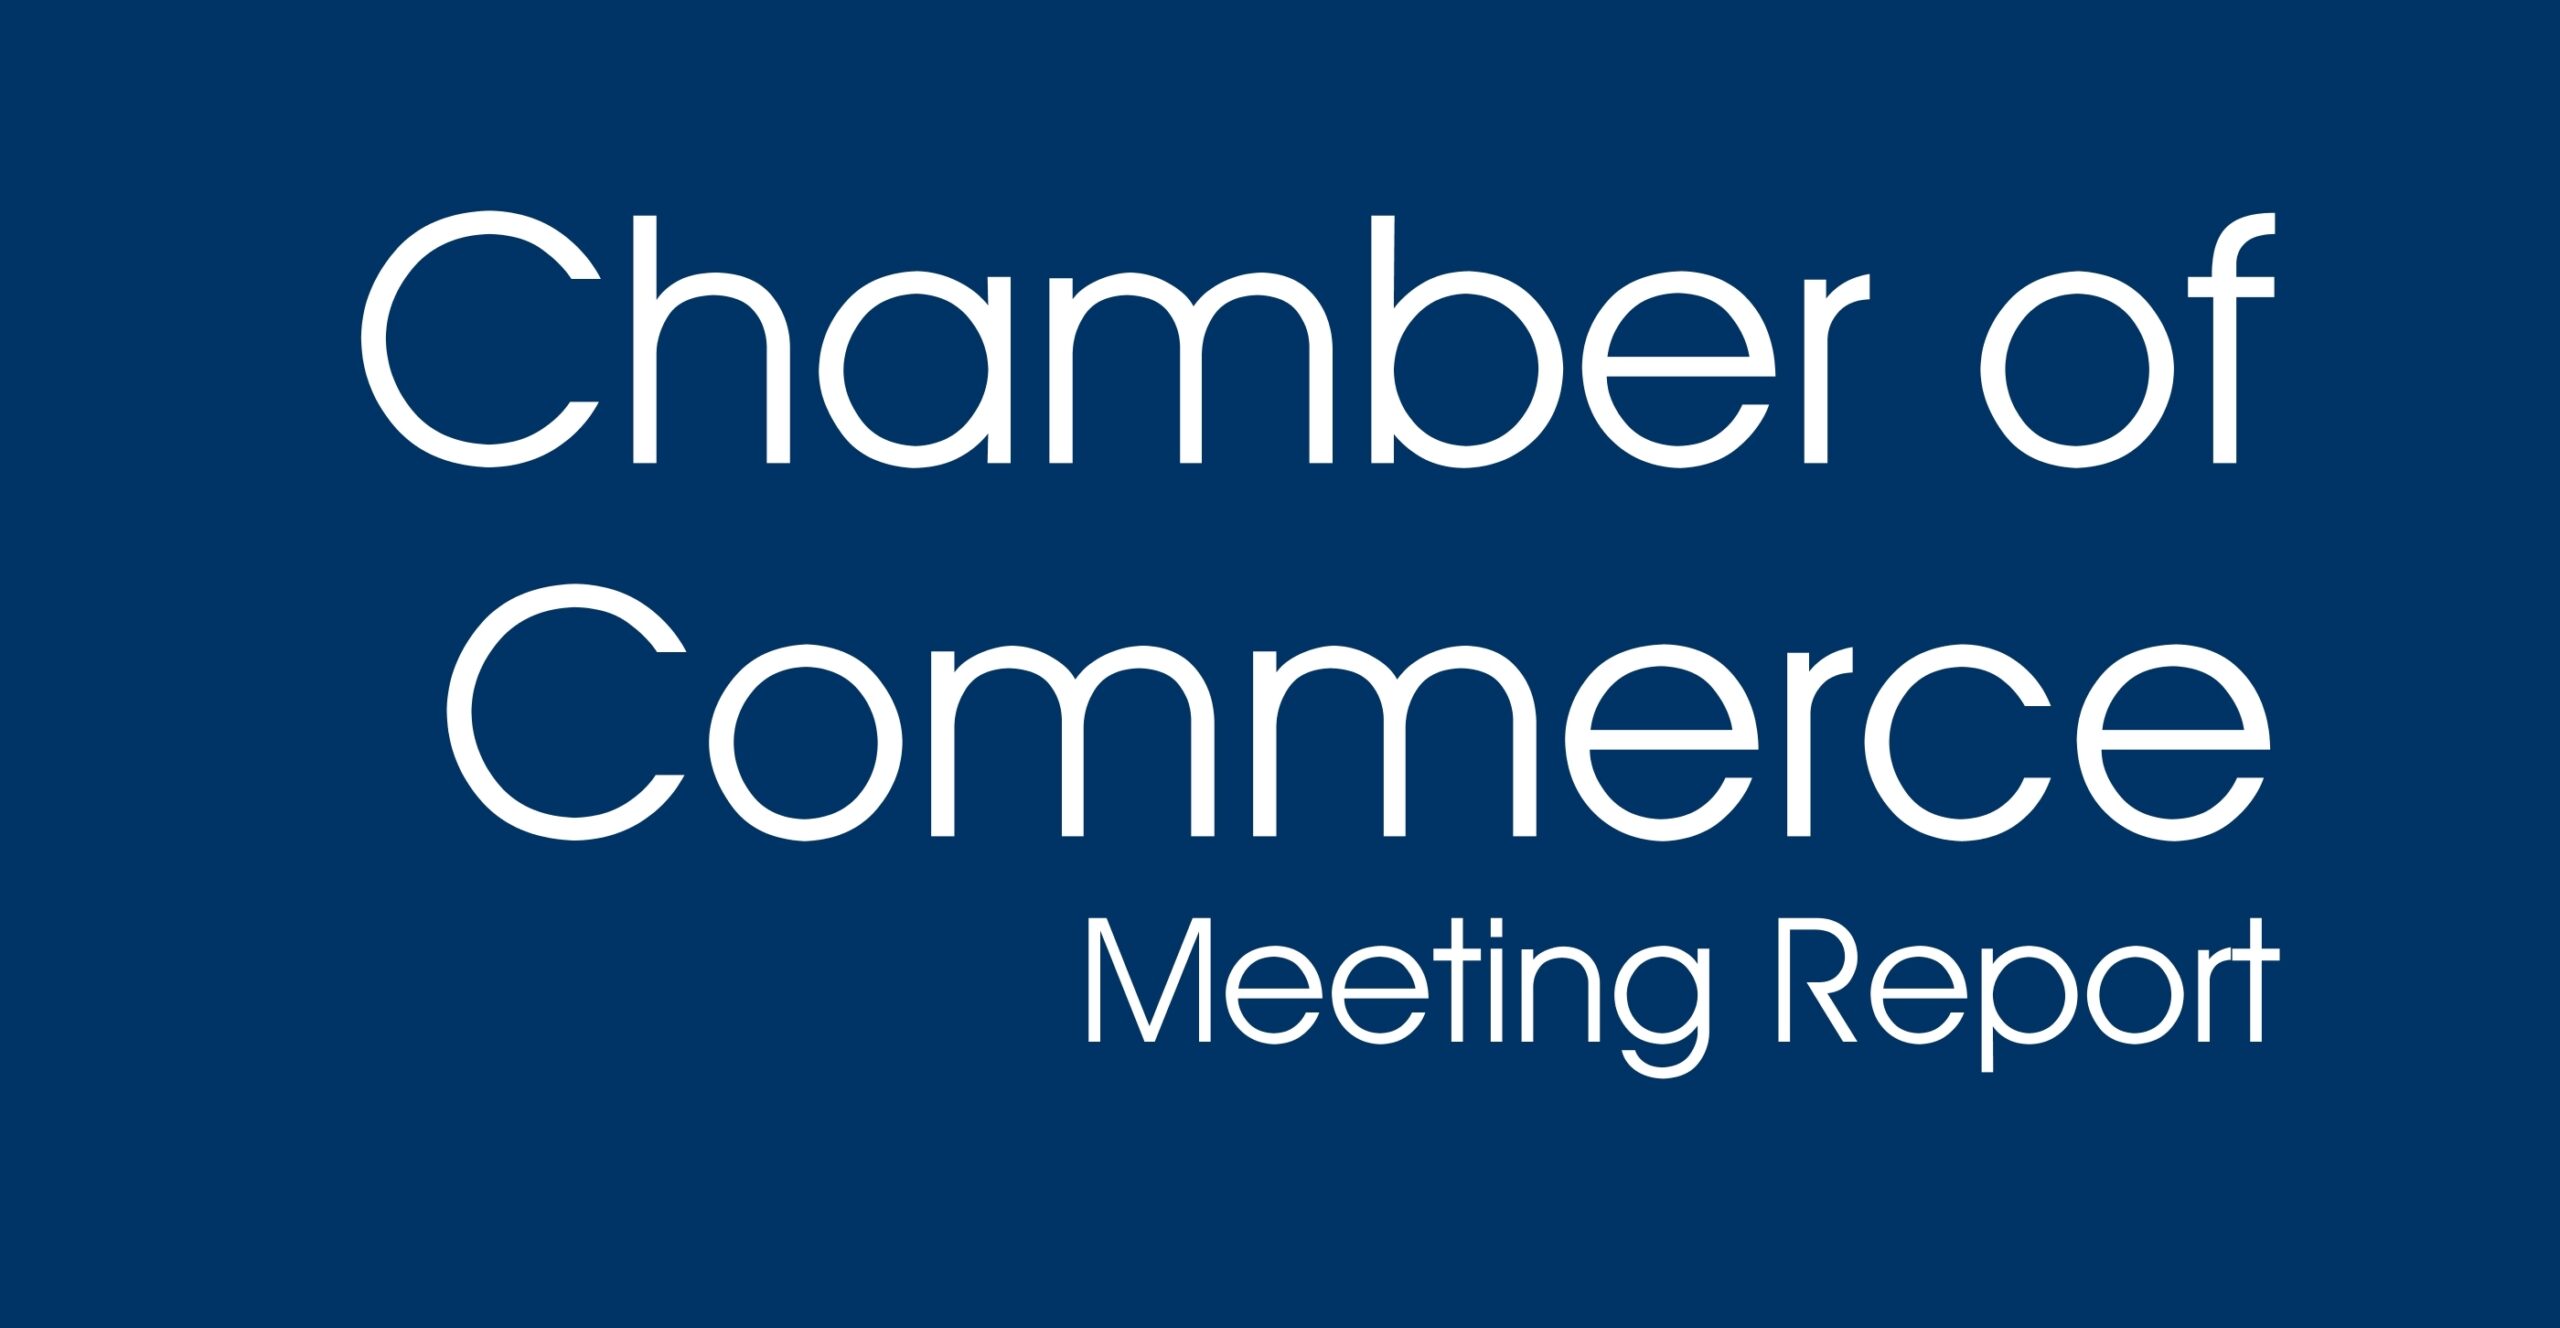 Easter egg hunt among projects discussed during monthly Bradley County Chamber Board meeting